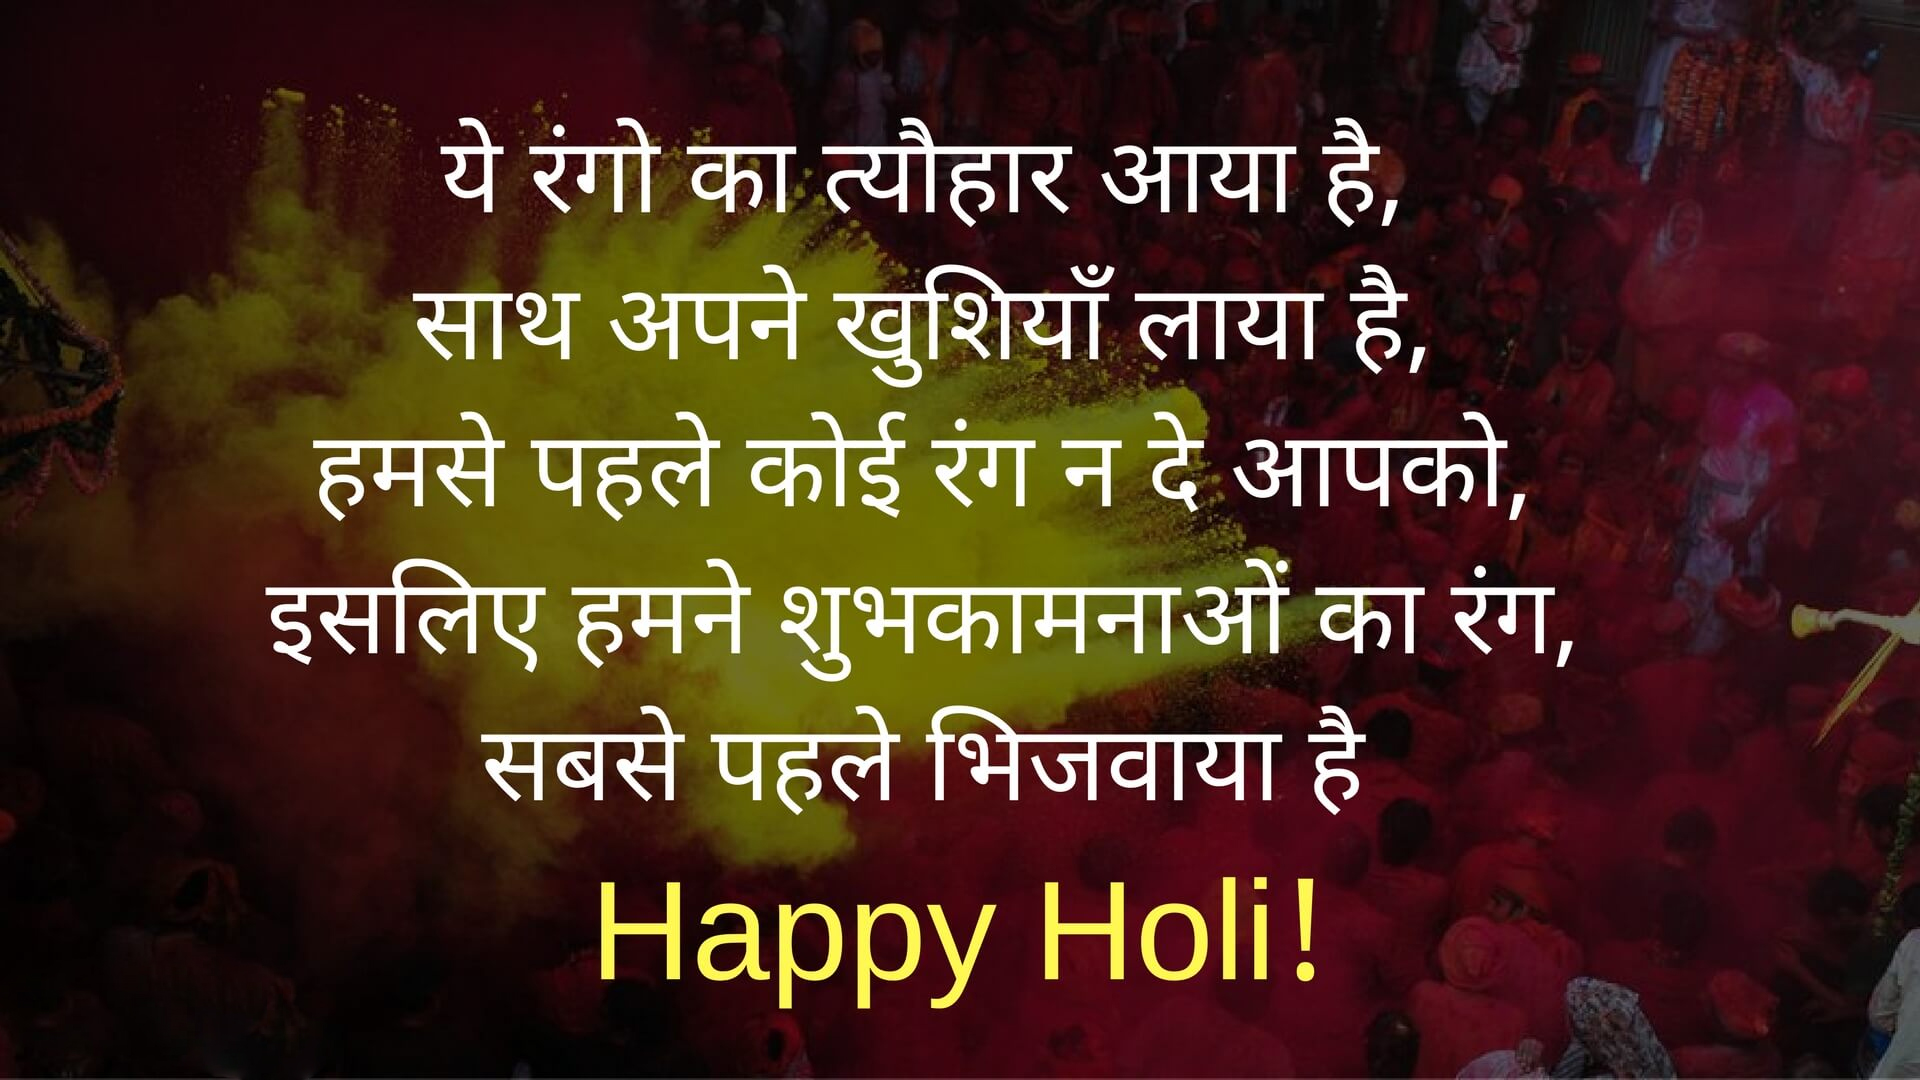 Holi Wishes In Hindi Hd Images Free Download